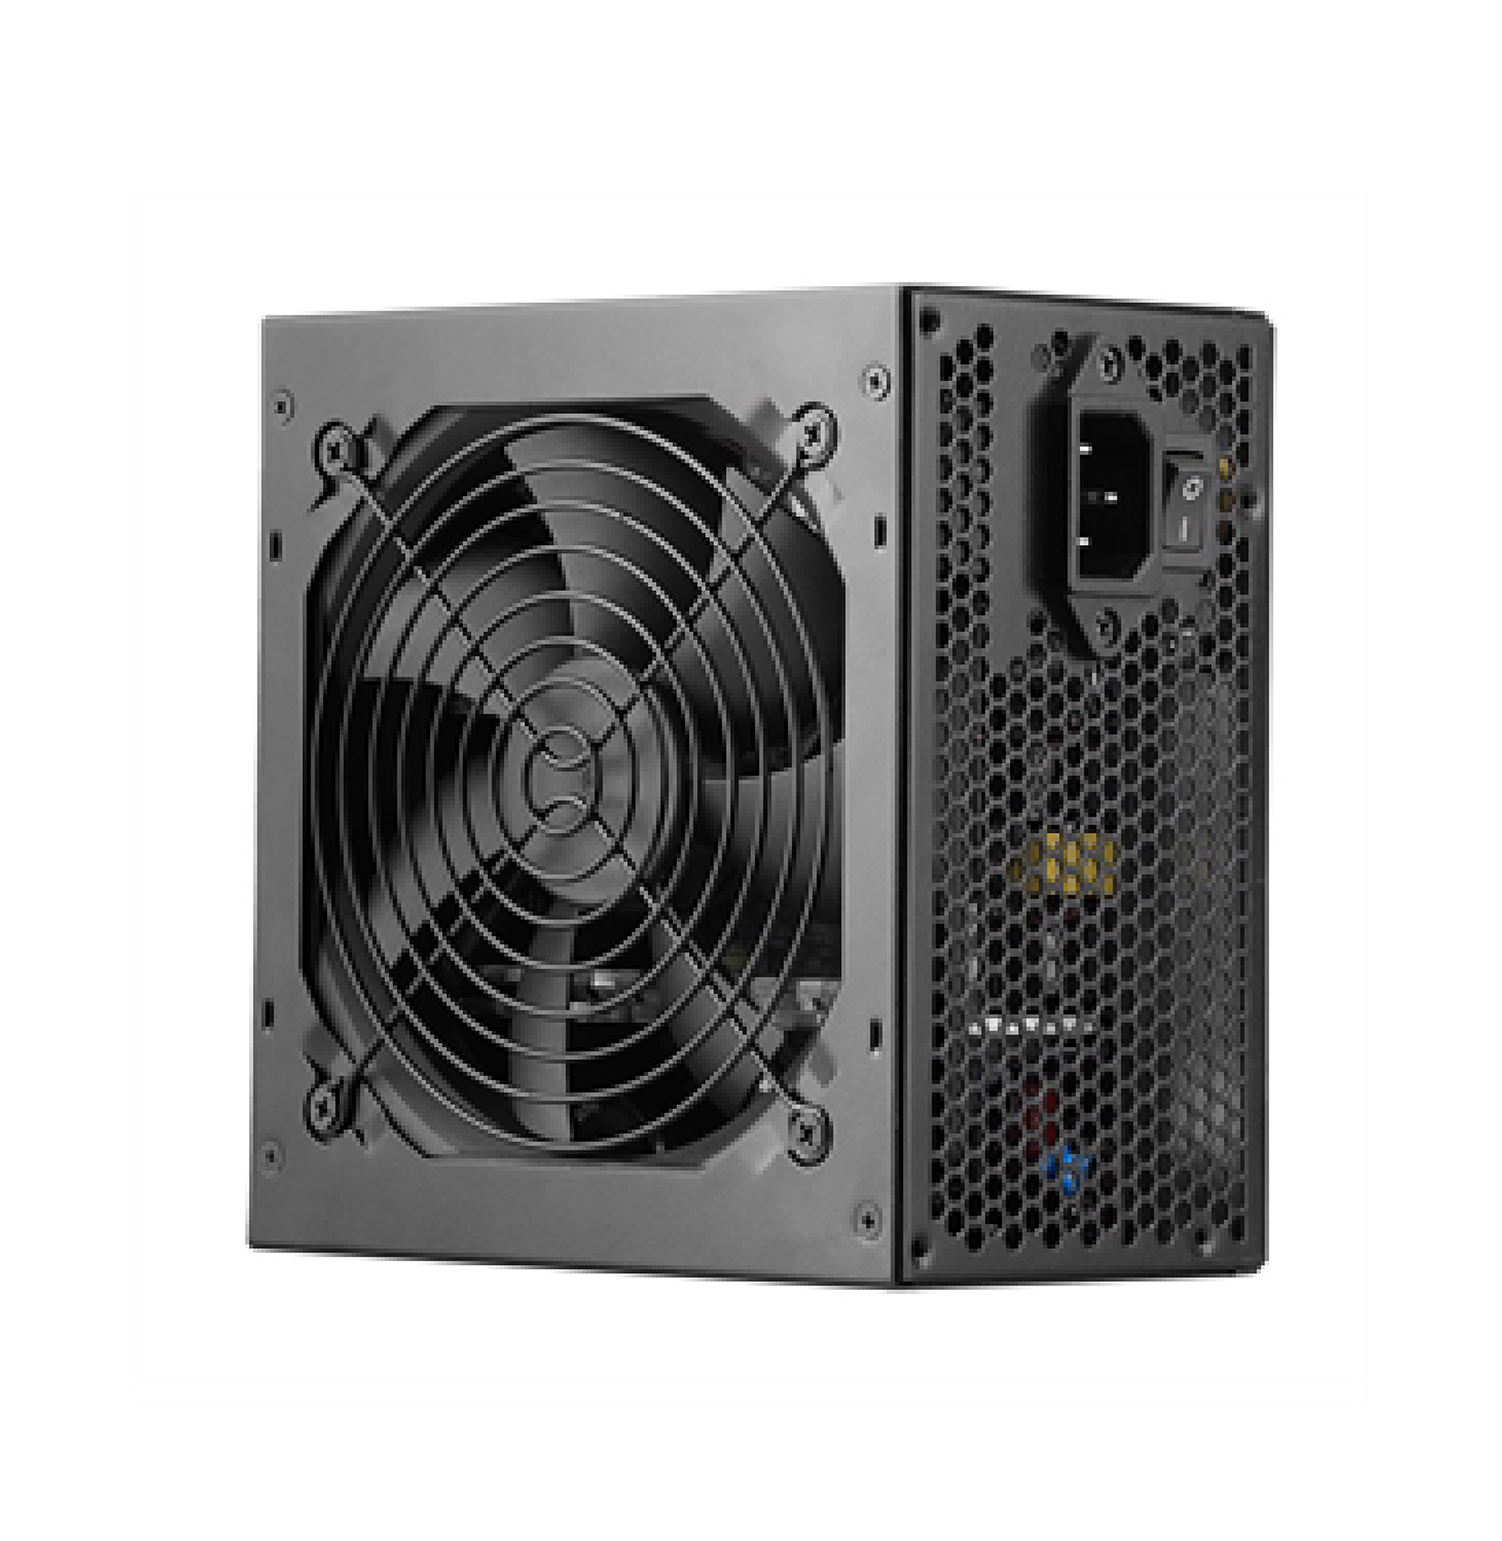 SEGOTEP AN550W POWER SUPPLY